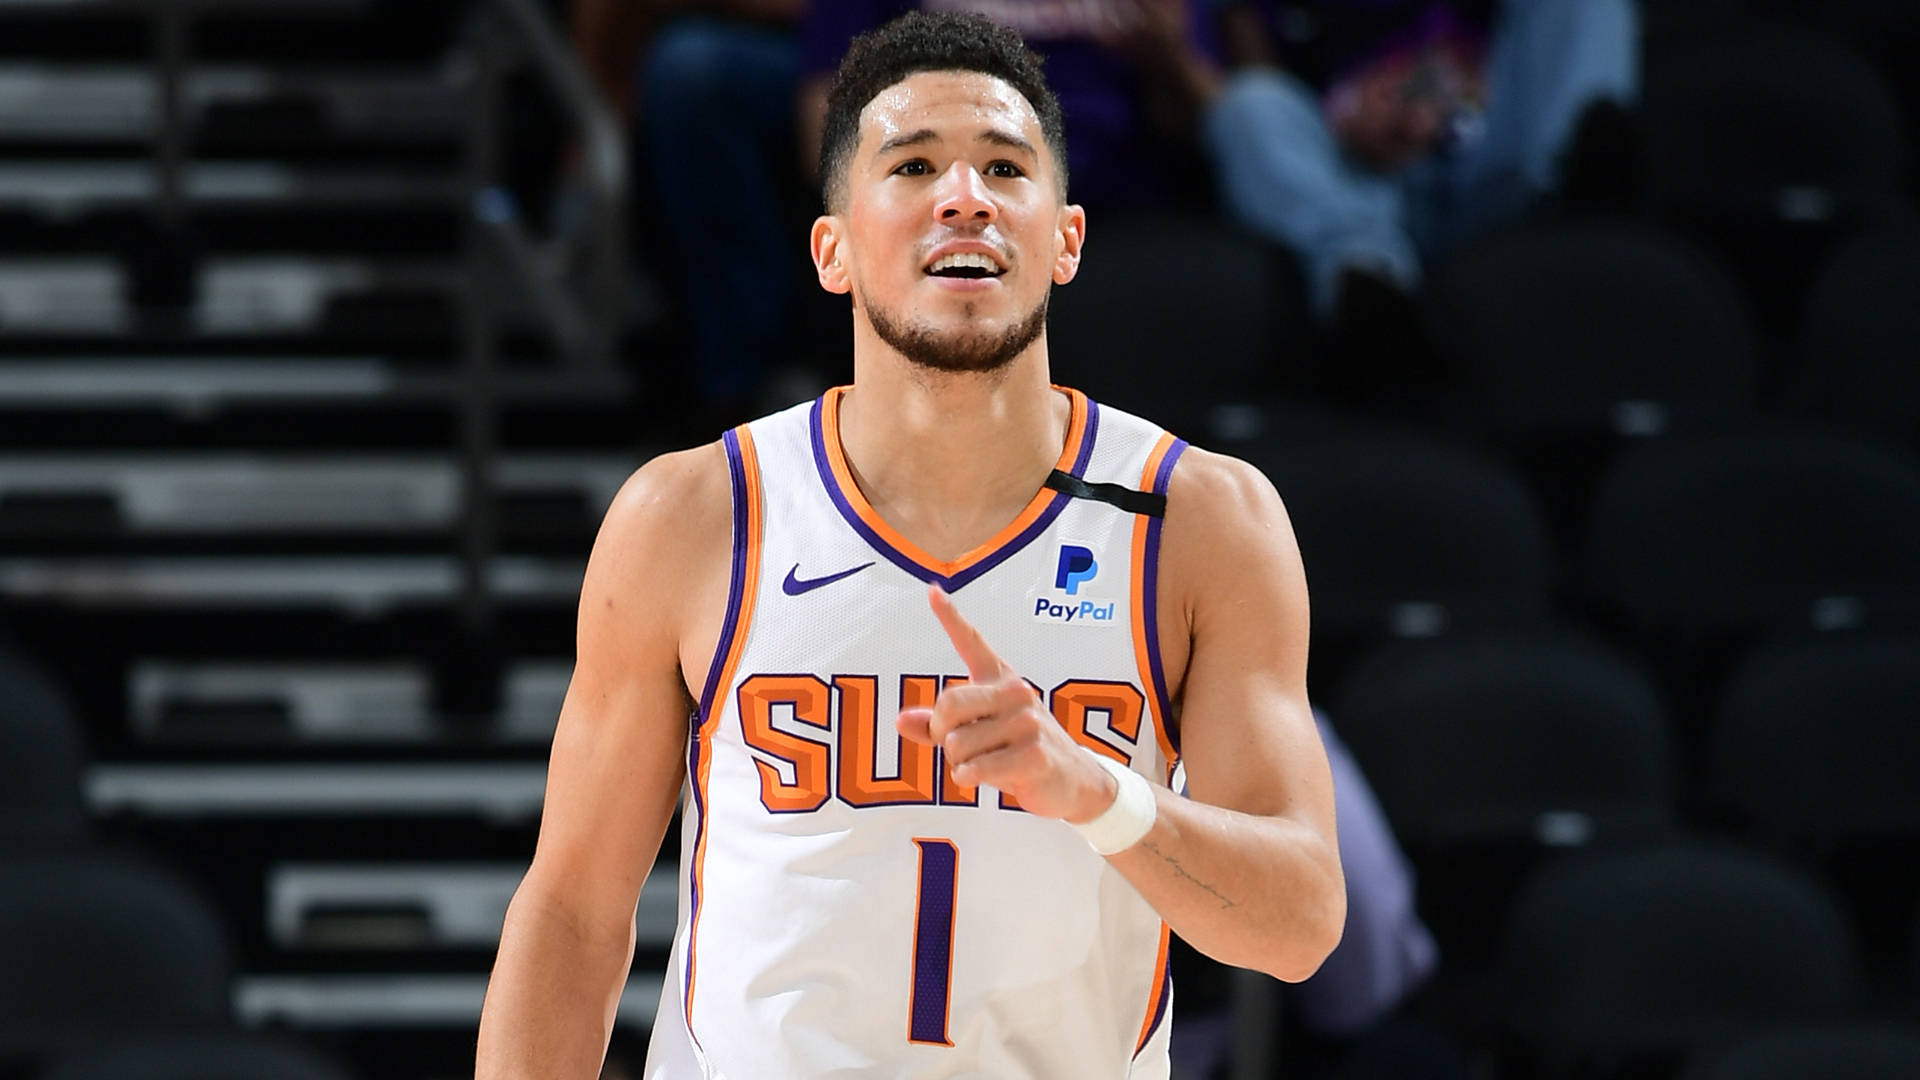 Devin Booker Smiling With Hand Raised Wallpaper